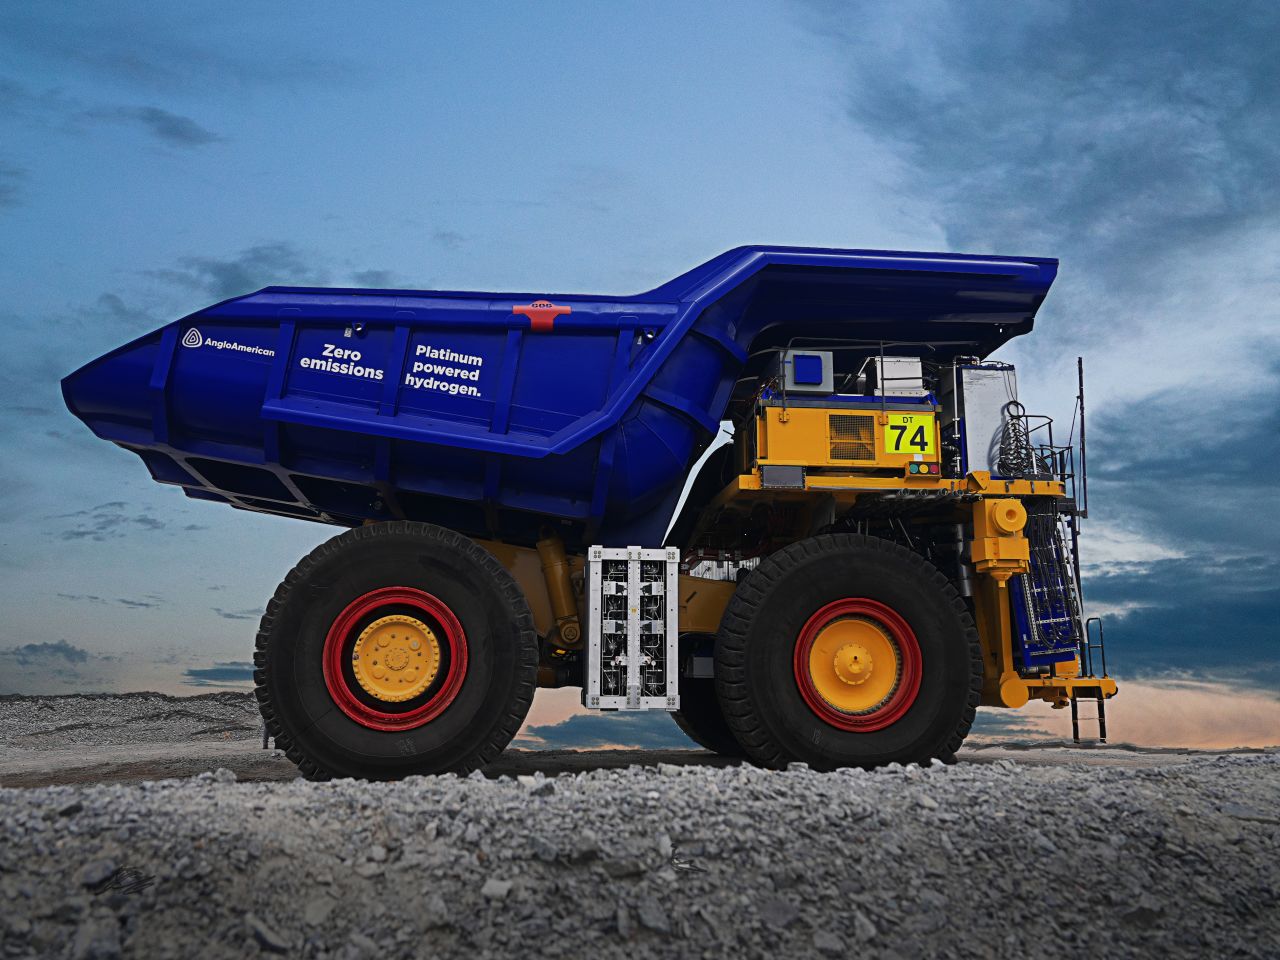 Commissioned by mining company Anglo American and created by First Mode, this hydrogen-powered hauling truck is the world's first. <strong>Look through the gallery for more ways hydrogen is powering transport options around the world.</strong>